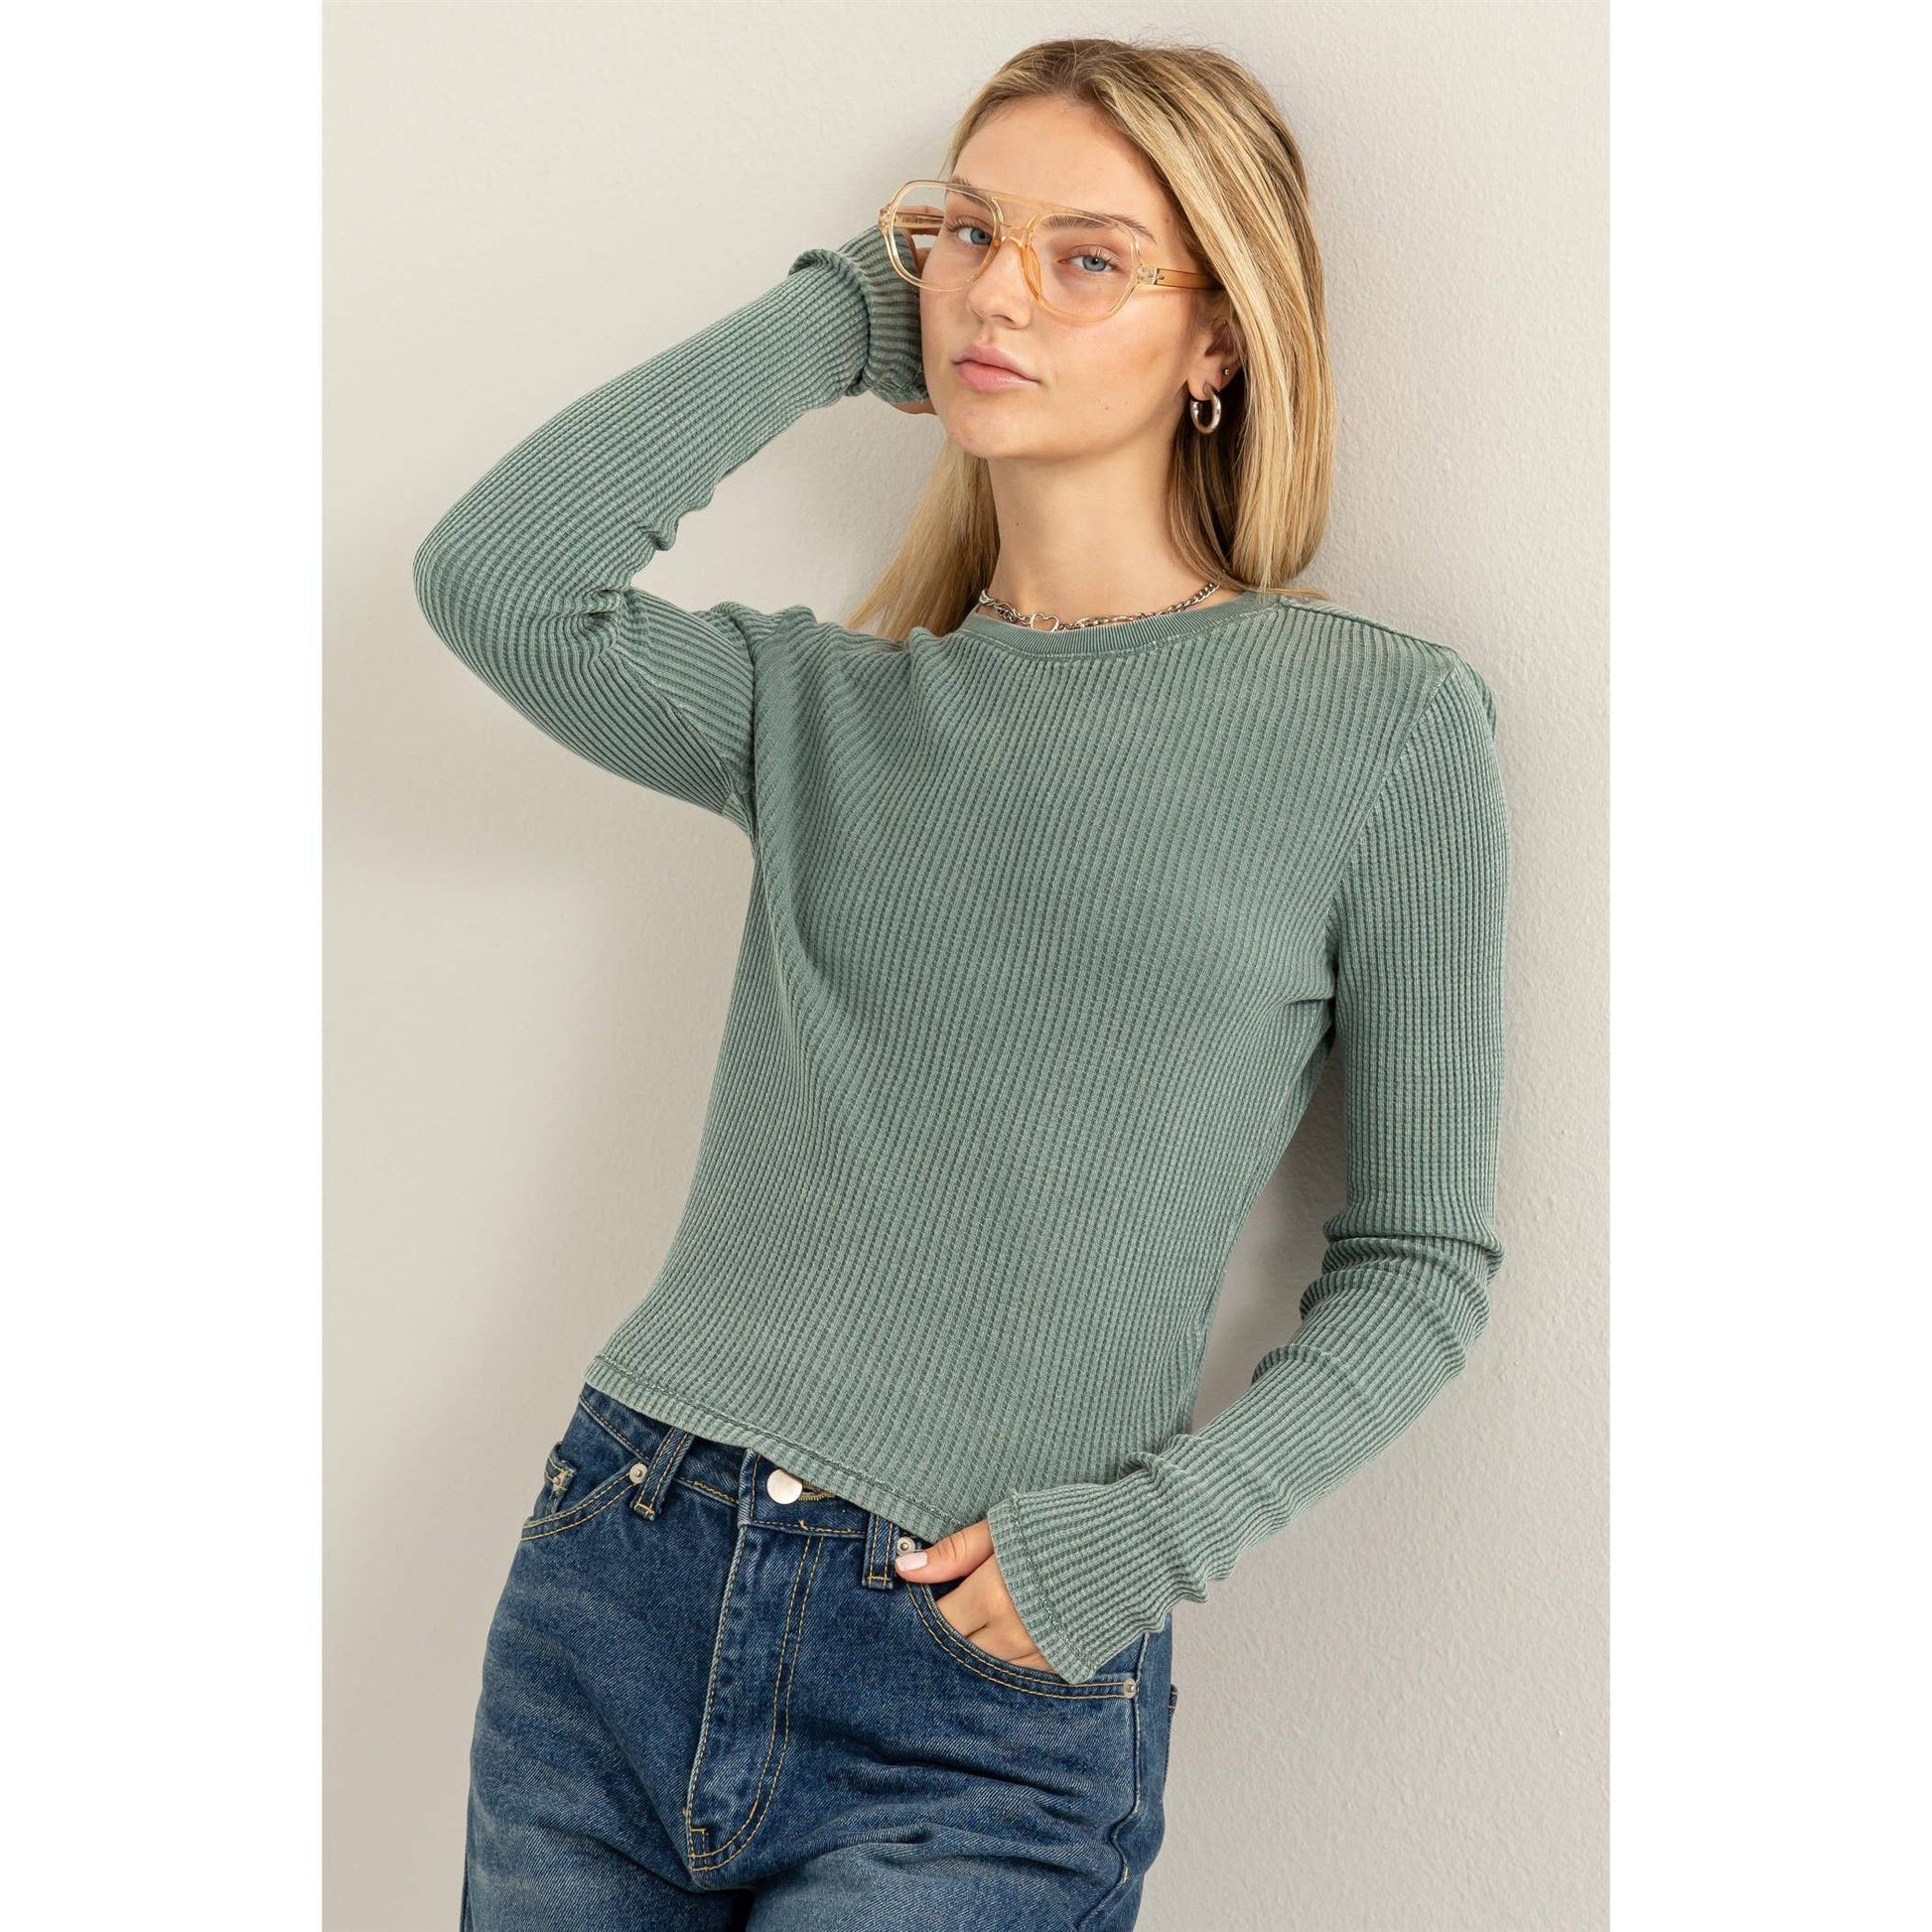 CHILL VIBES WAFFLE LONG SLEEVE TOP - Storm and Sky Shoppe - HYFVE